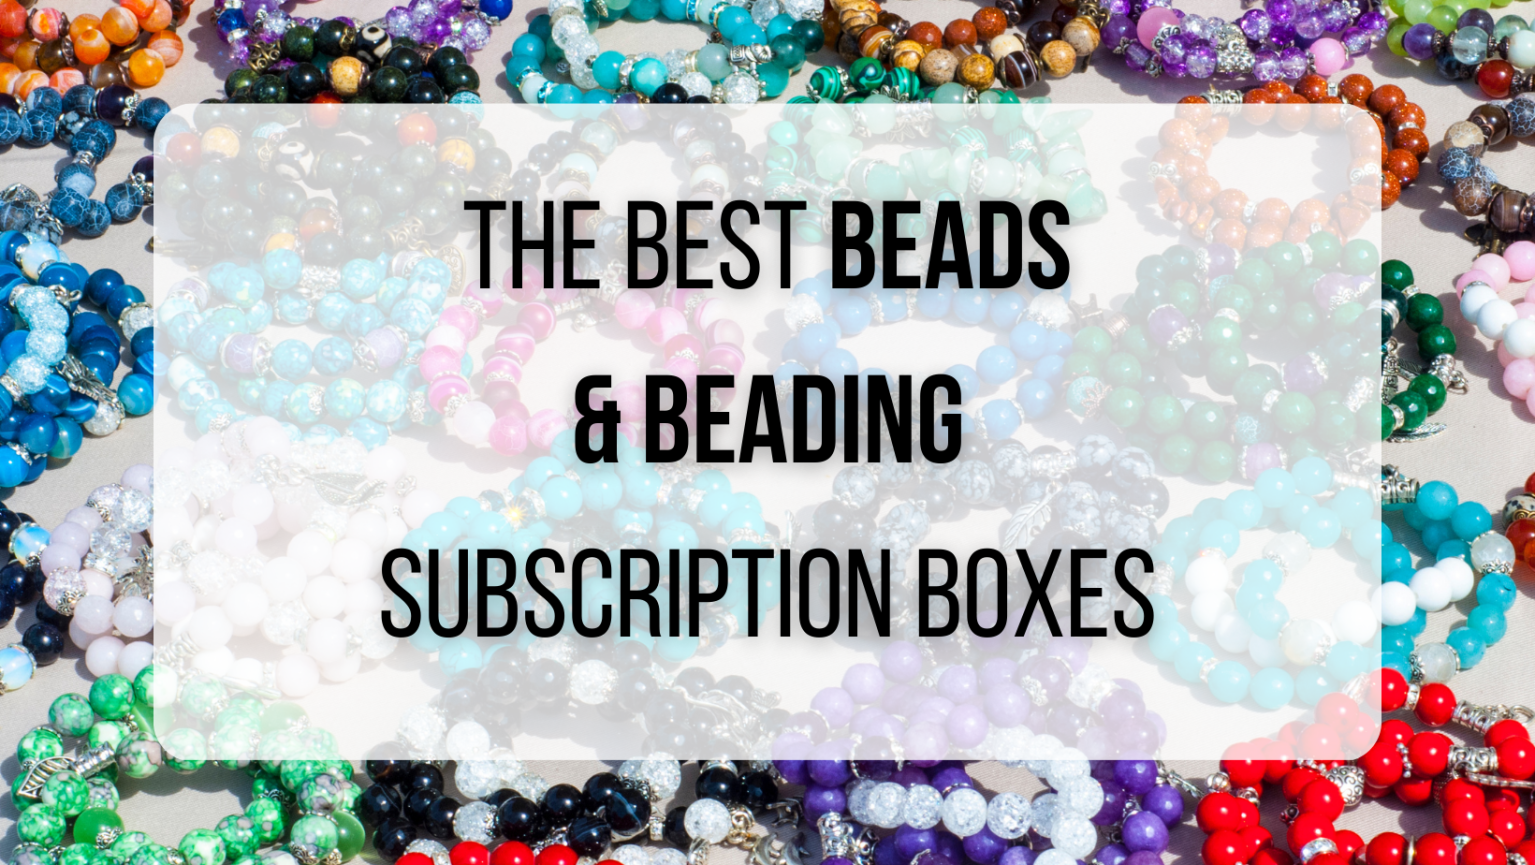 Bargain Bead Box Reviews Get All The Details At Hello Subscription!